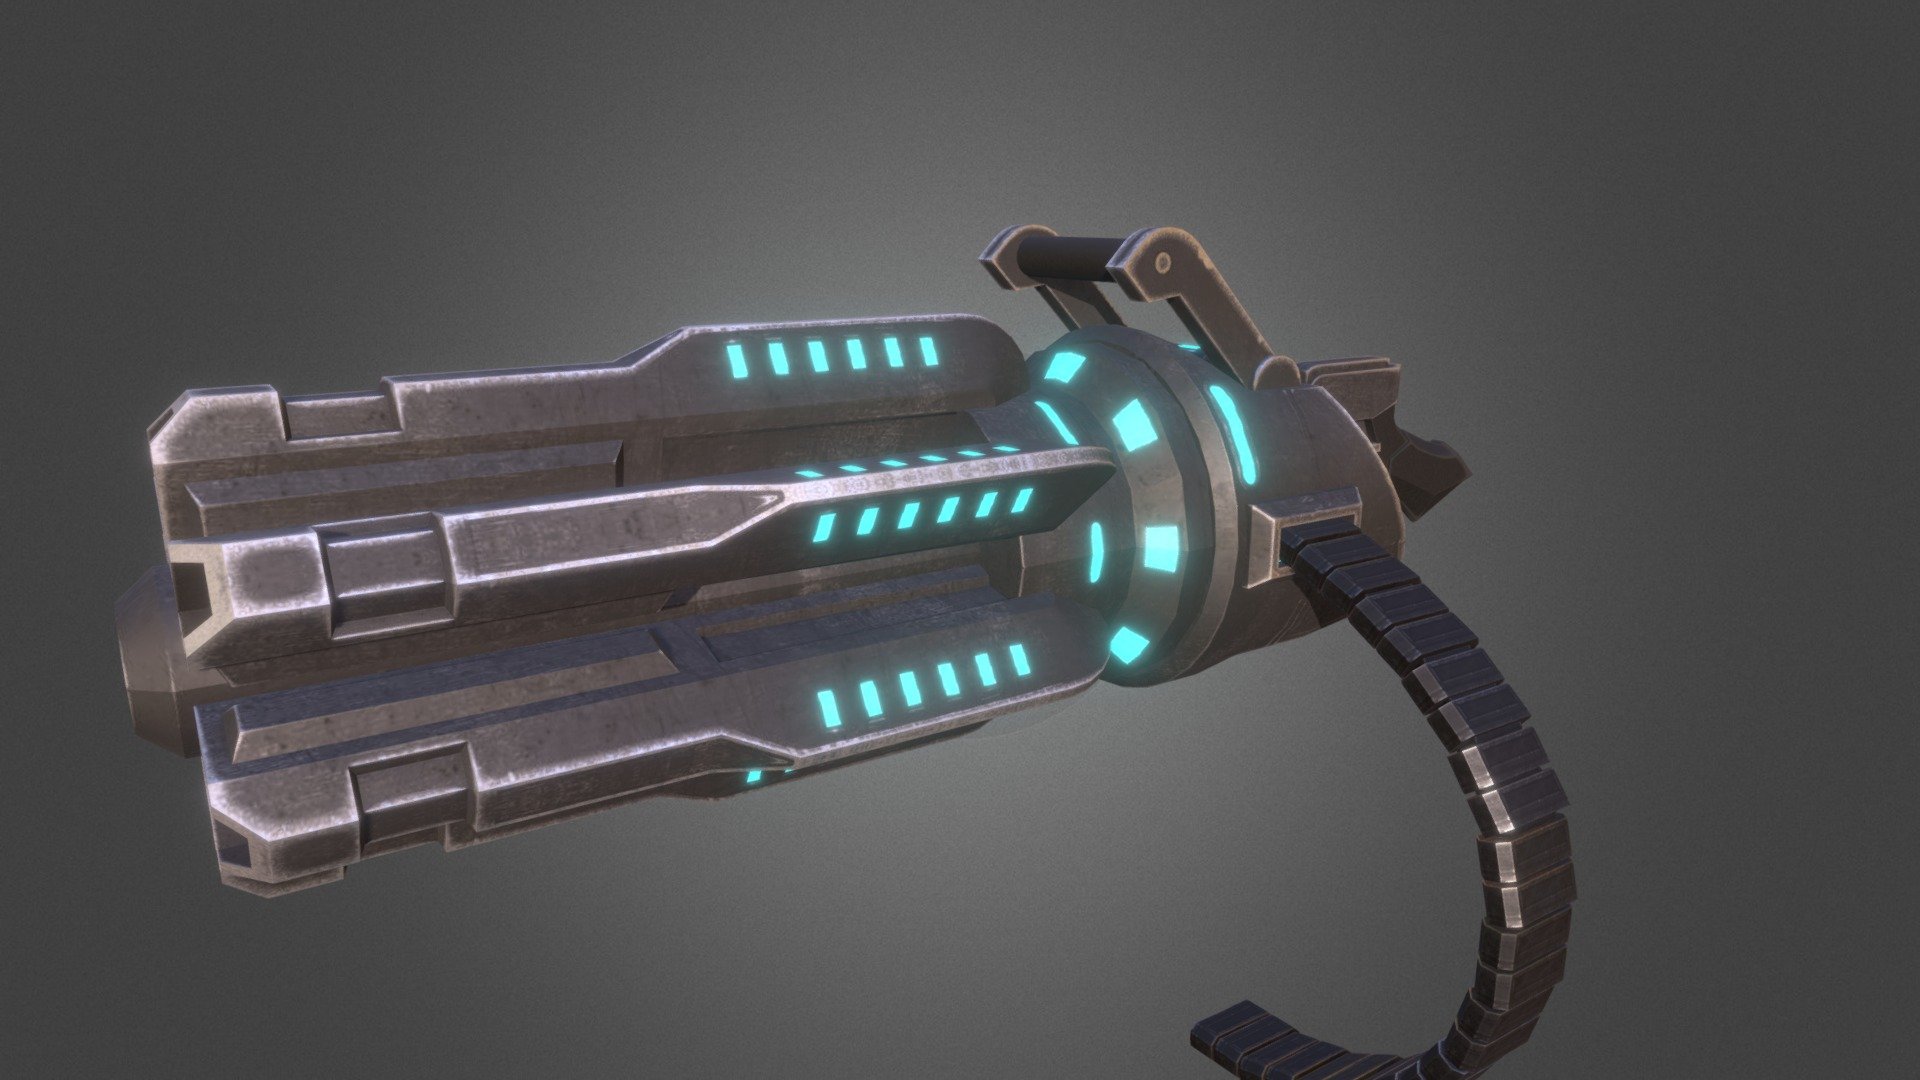 This minigun has 1k PBR Textures, is animated and ready for ingame usage. I made it with Blender and 3DCoat 3d model